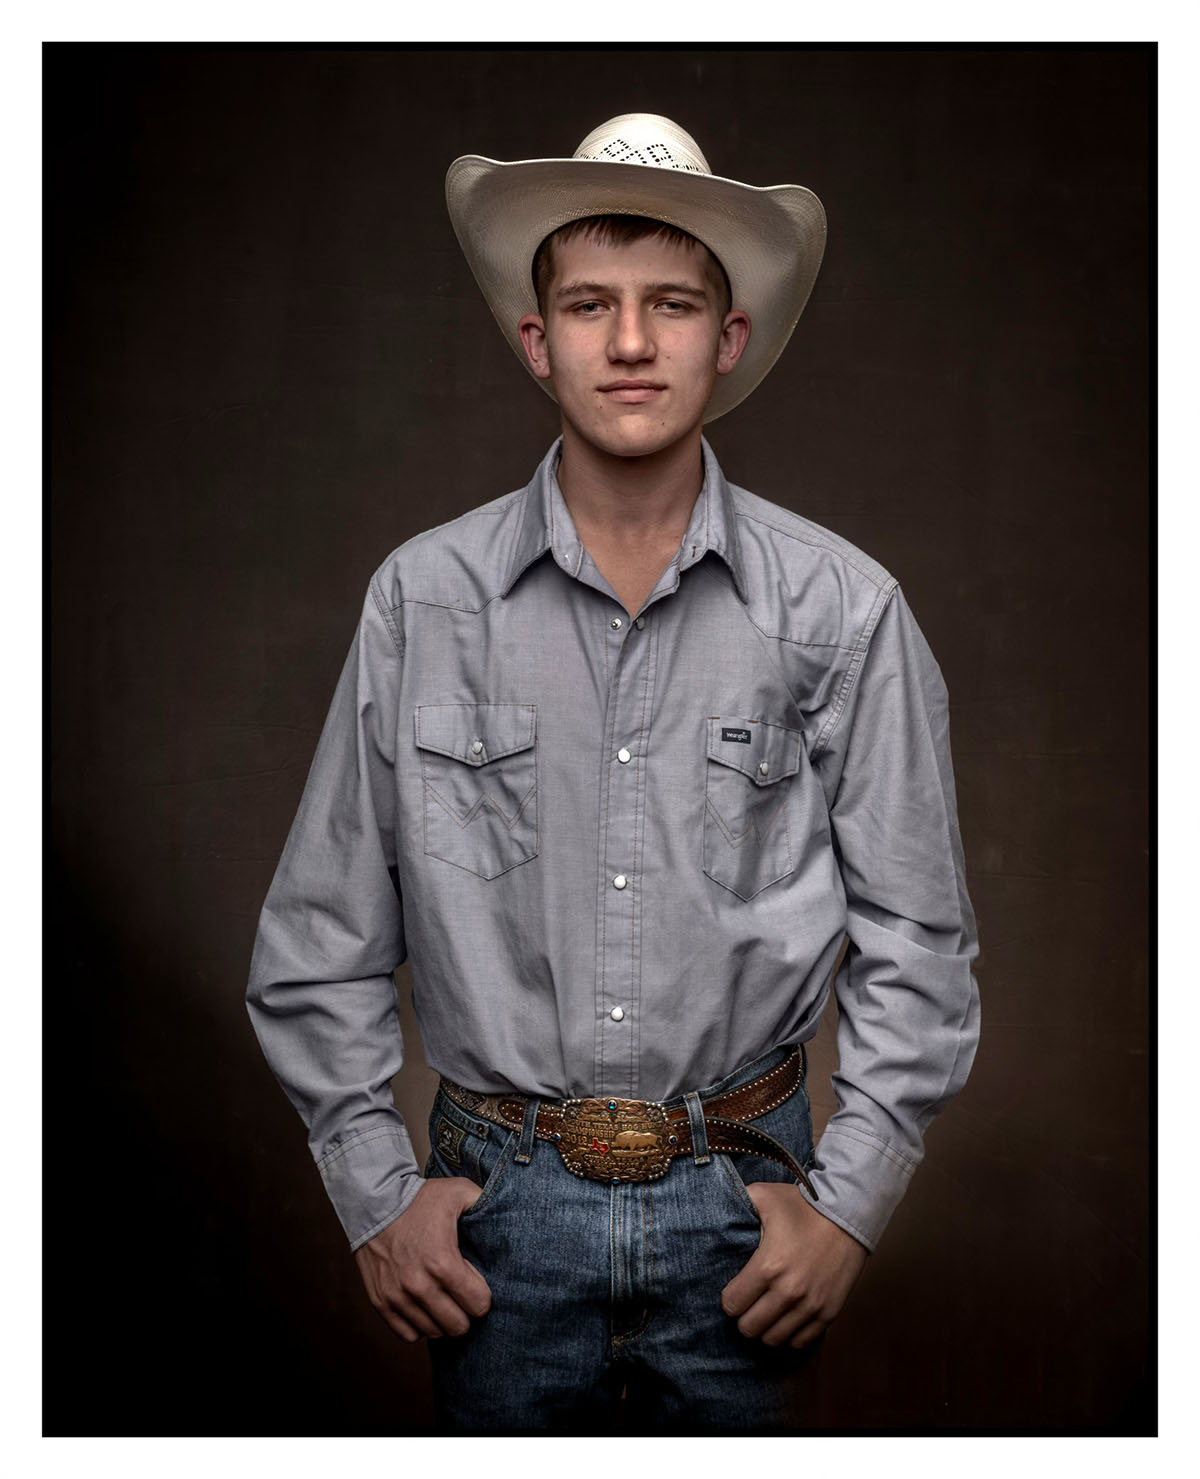 A young man in a white cowboy hat poses with his hands in his pockets